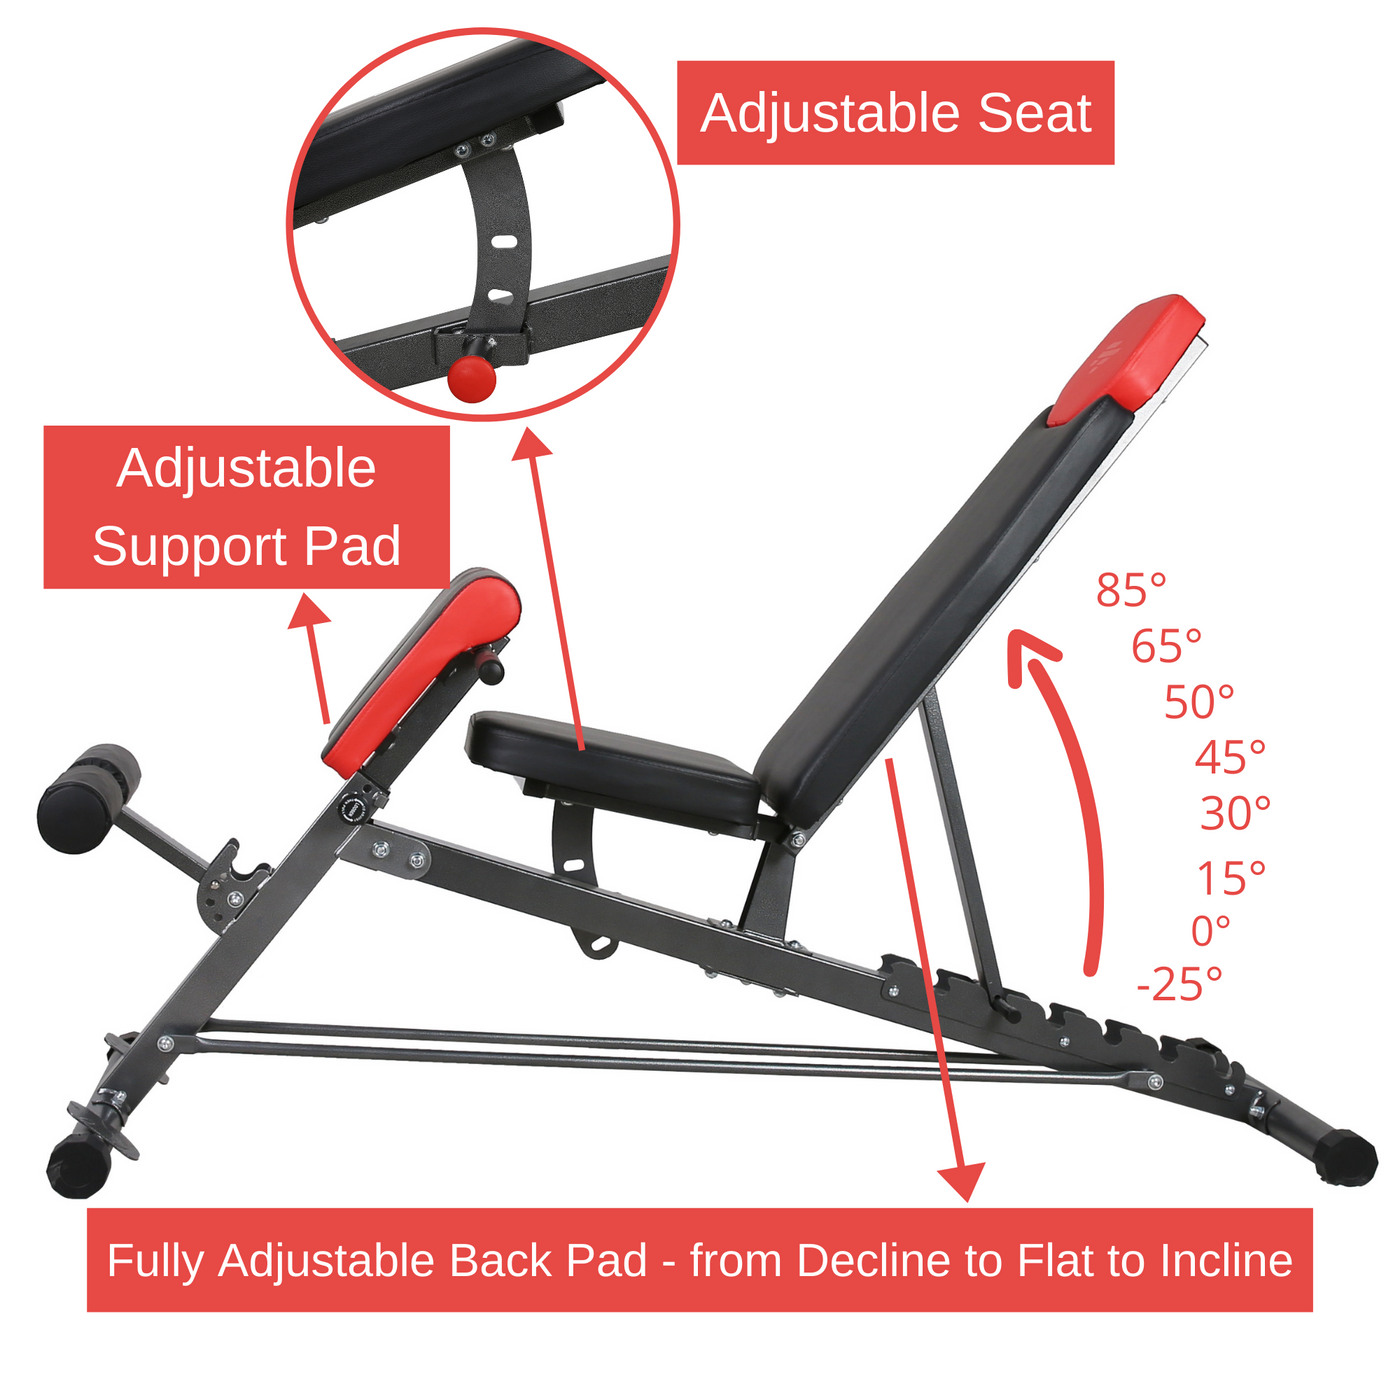 Multi-Functional FID Weight Bench for Full-Body Workout by Finer